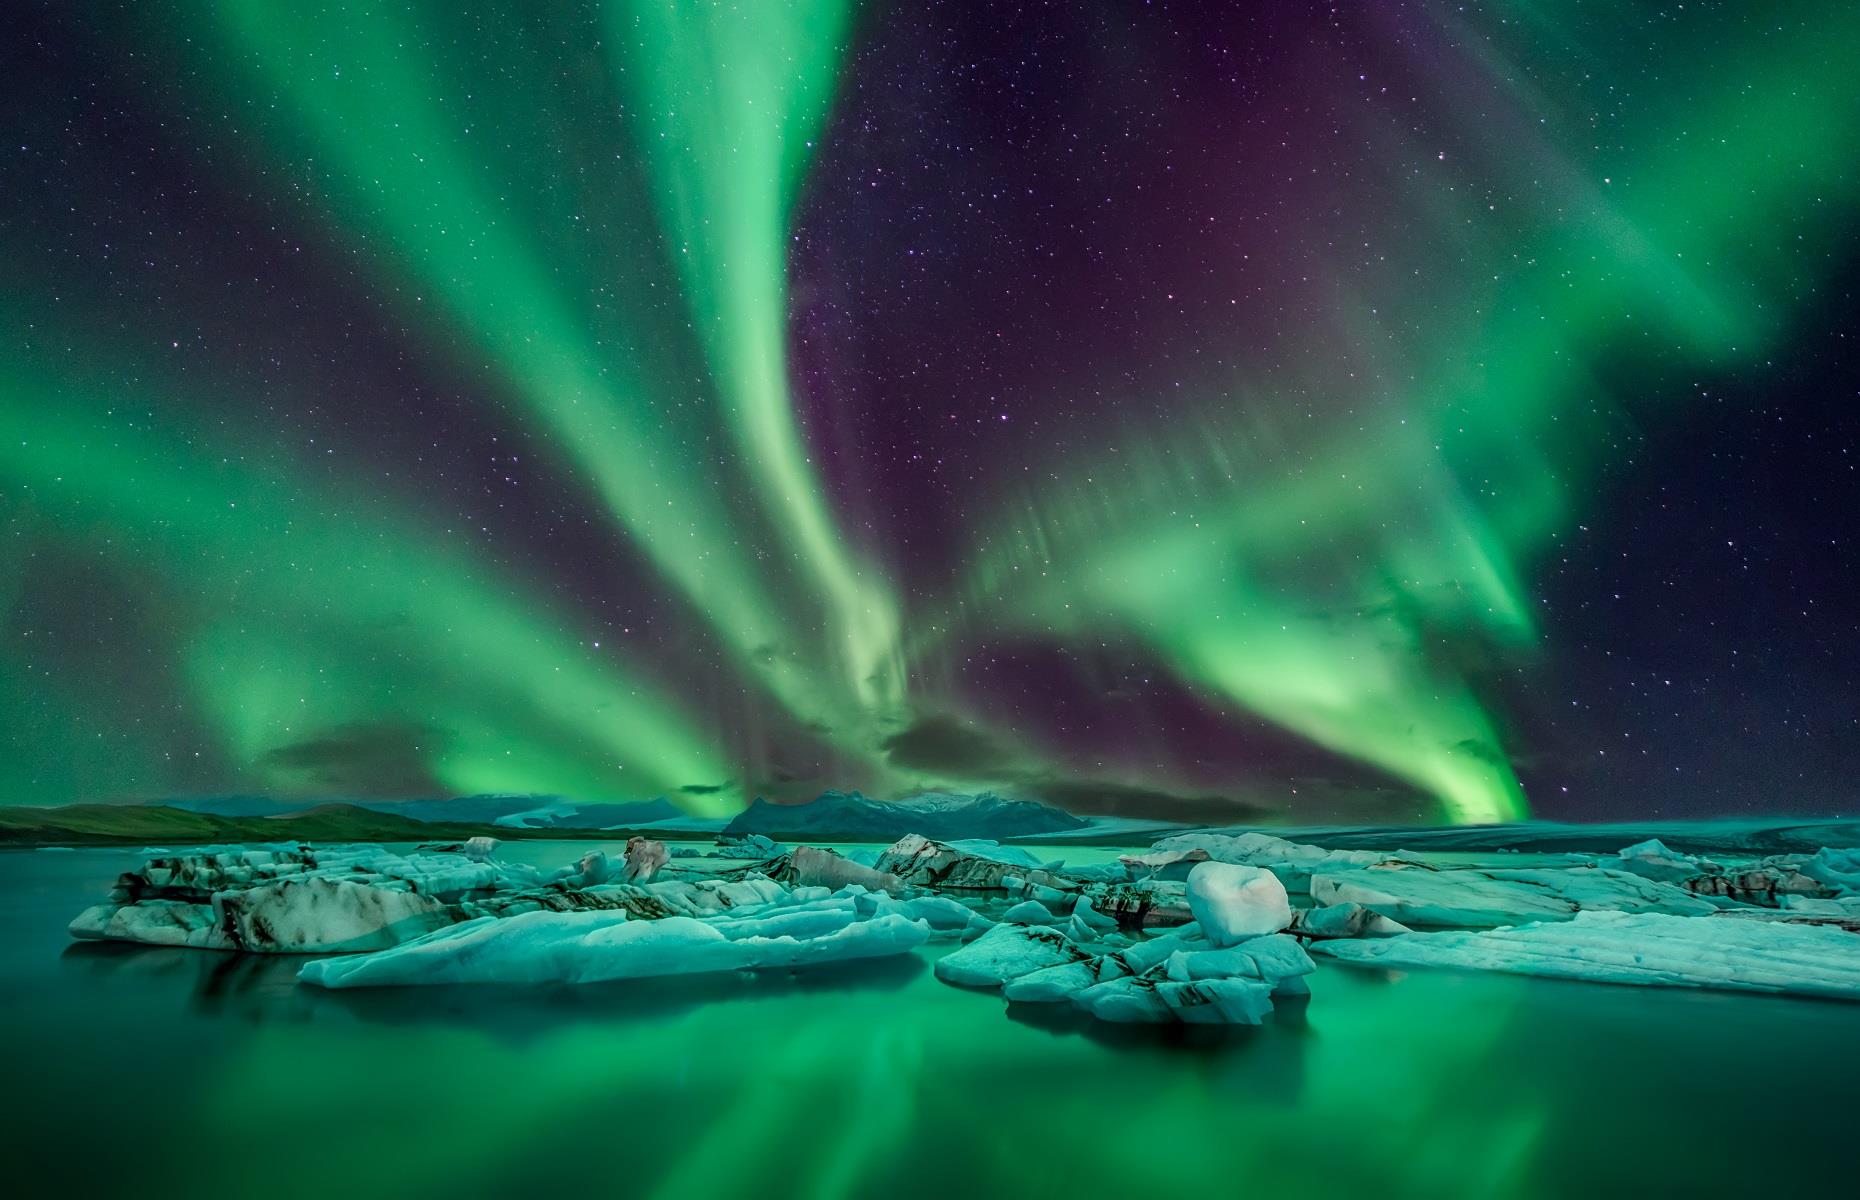 <p>Most visitors to Iceland have a bucket list of experiences they want to tick off, but none is quite so sought-after as seeing the Northern Lights. The aurora borealis is a natural phenomena that people venture far and wide to witness. These dancing beams of light occur when atoms are energized as they collide with the atmosphere and are best seen on clear and dark winter nights. You can catch the Northern Lights throughout Iceland but Grótta lighthouse, on the country's northwesternmost point, is a particularly good spot to see them.</p>  <p><a href="https://www.loveexploring.com/galleries/91678/24-stunning-images-of-the-northern-lights?page=1"><strong>Check out these stunning images of the Northern Lights</strong></a></p>